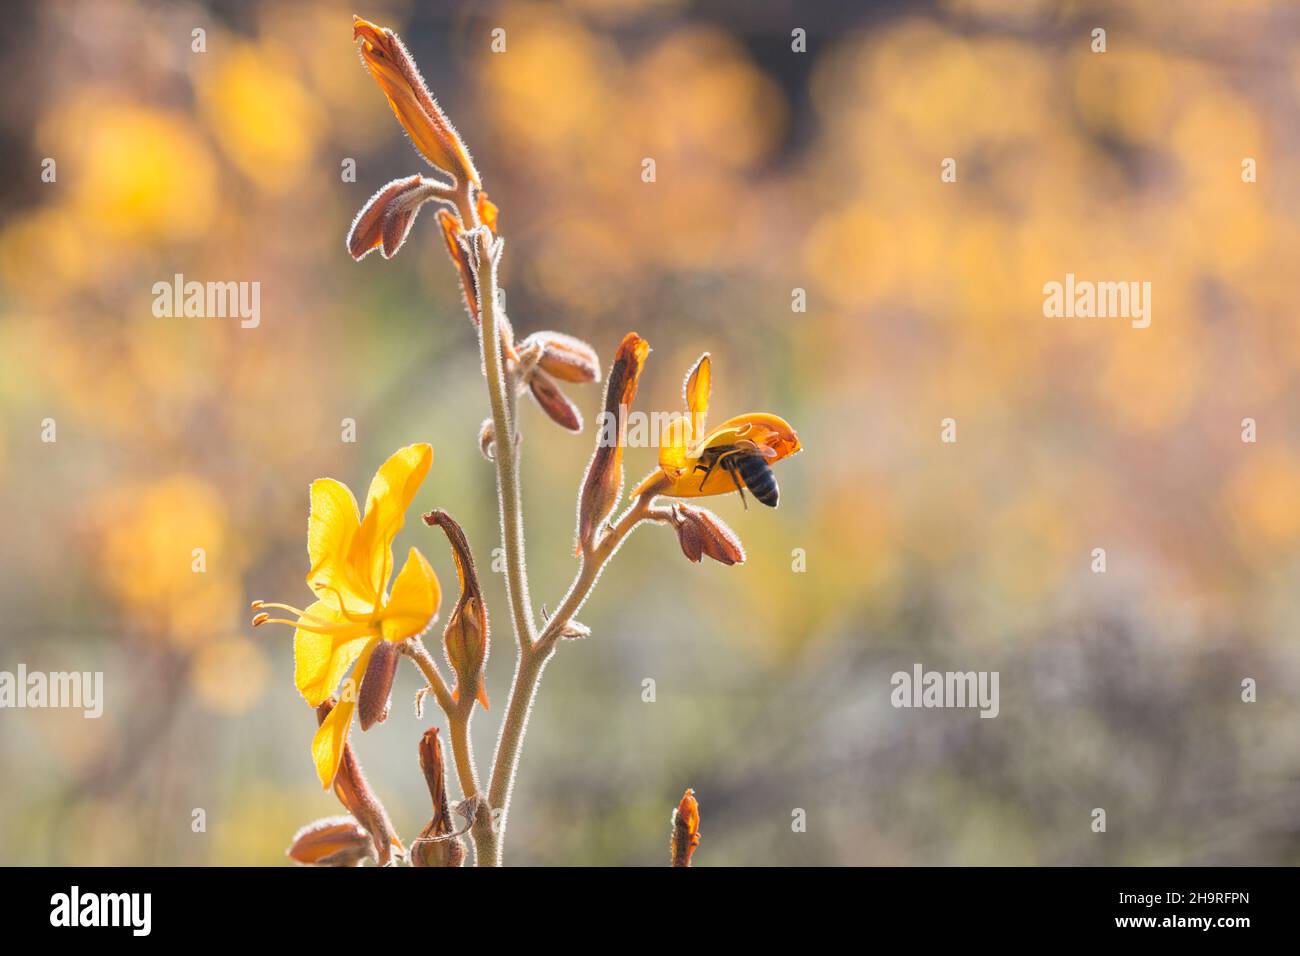 Yellow flowers of the Common Butterflylily (Wachendorfia paniculata) with a honey bee in one of the flowers Stock Photo